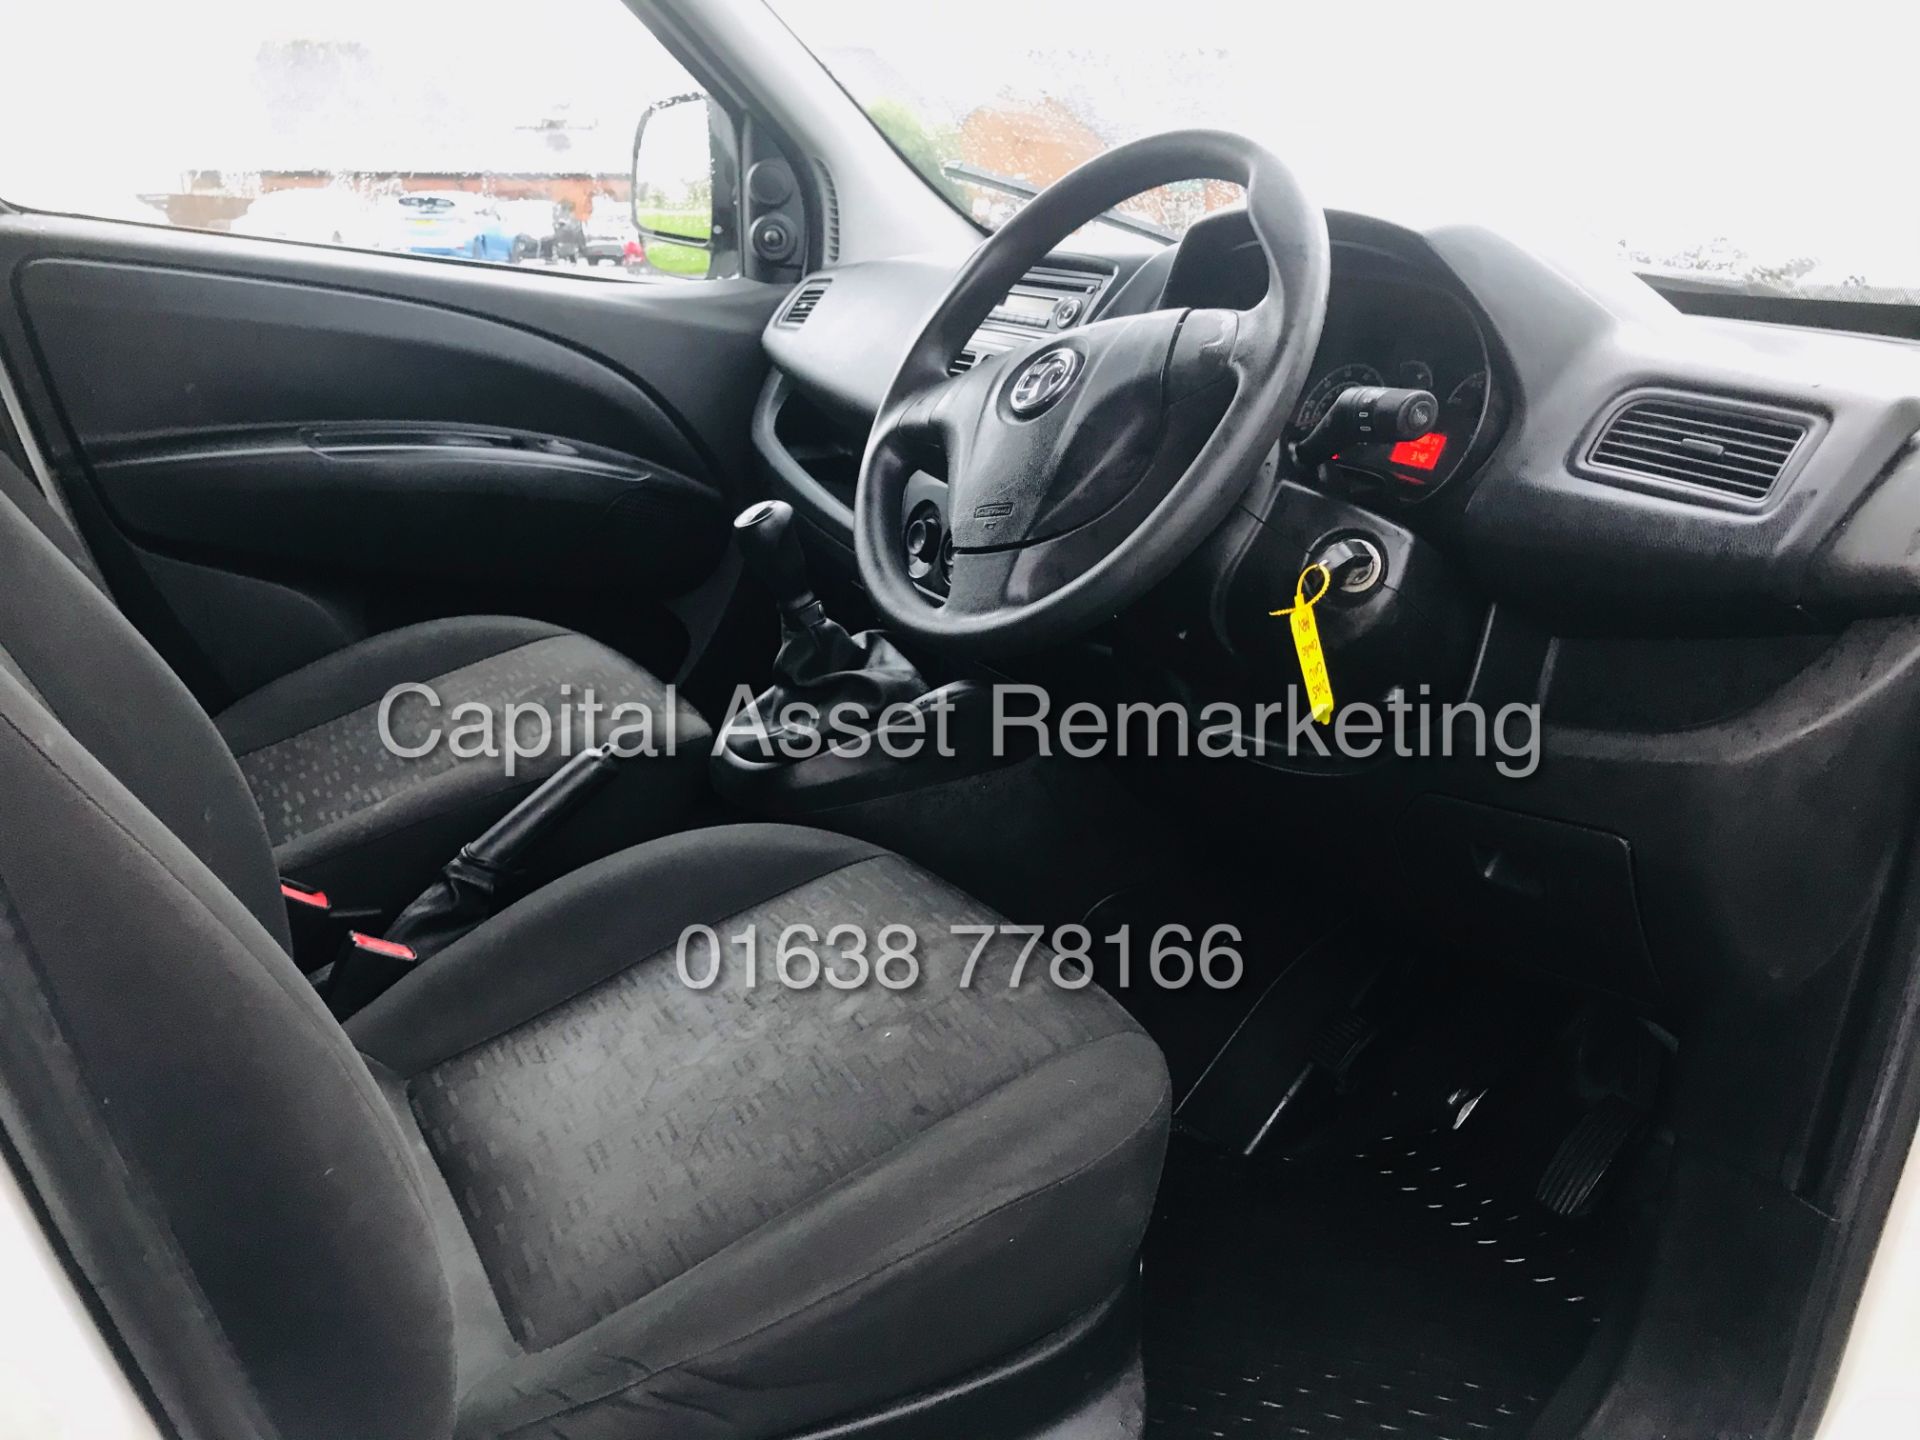 (On Sale) VAUXHALL COMBO 2000 "CDTI" 16v ECO FLEX -2016 - 1 KEEPER -ONLY 58K MILES - SERVICE HISTORY - Image 7 of 13